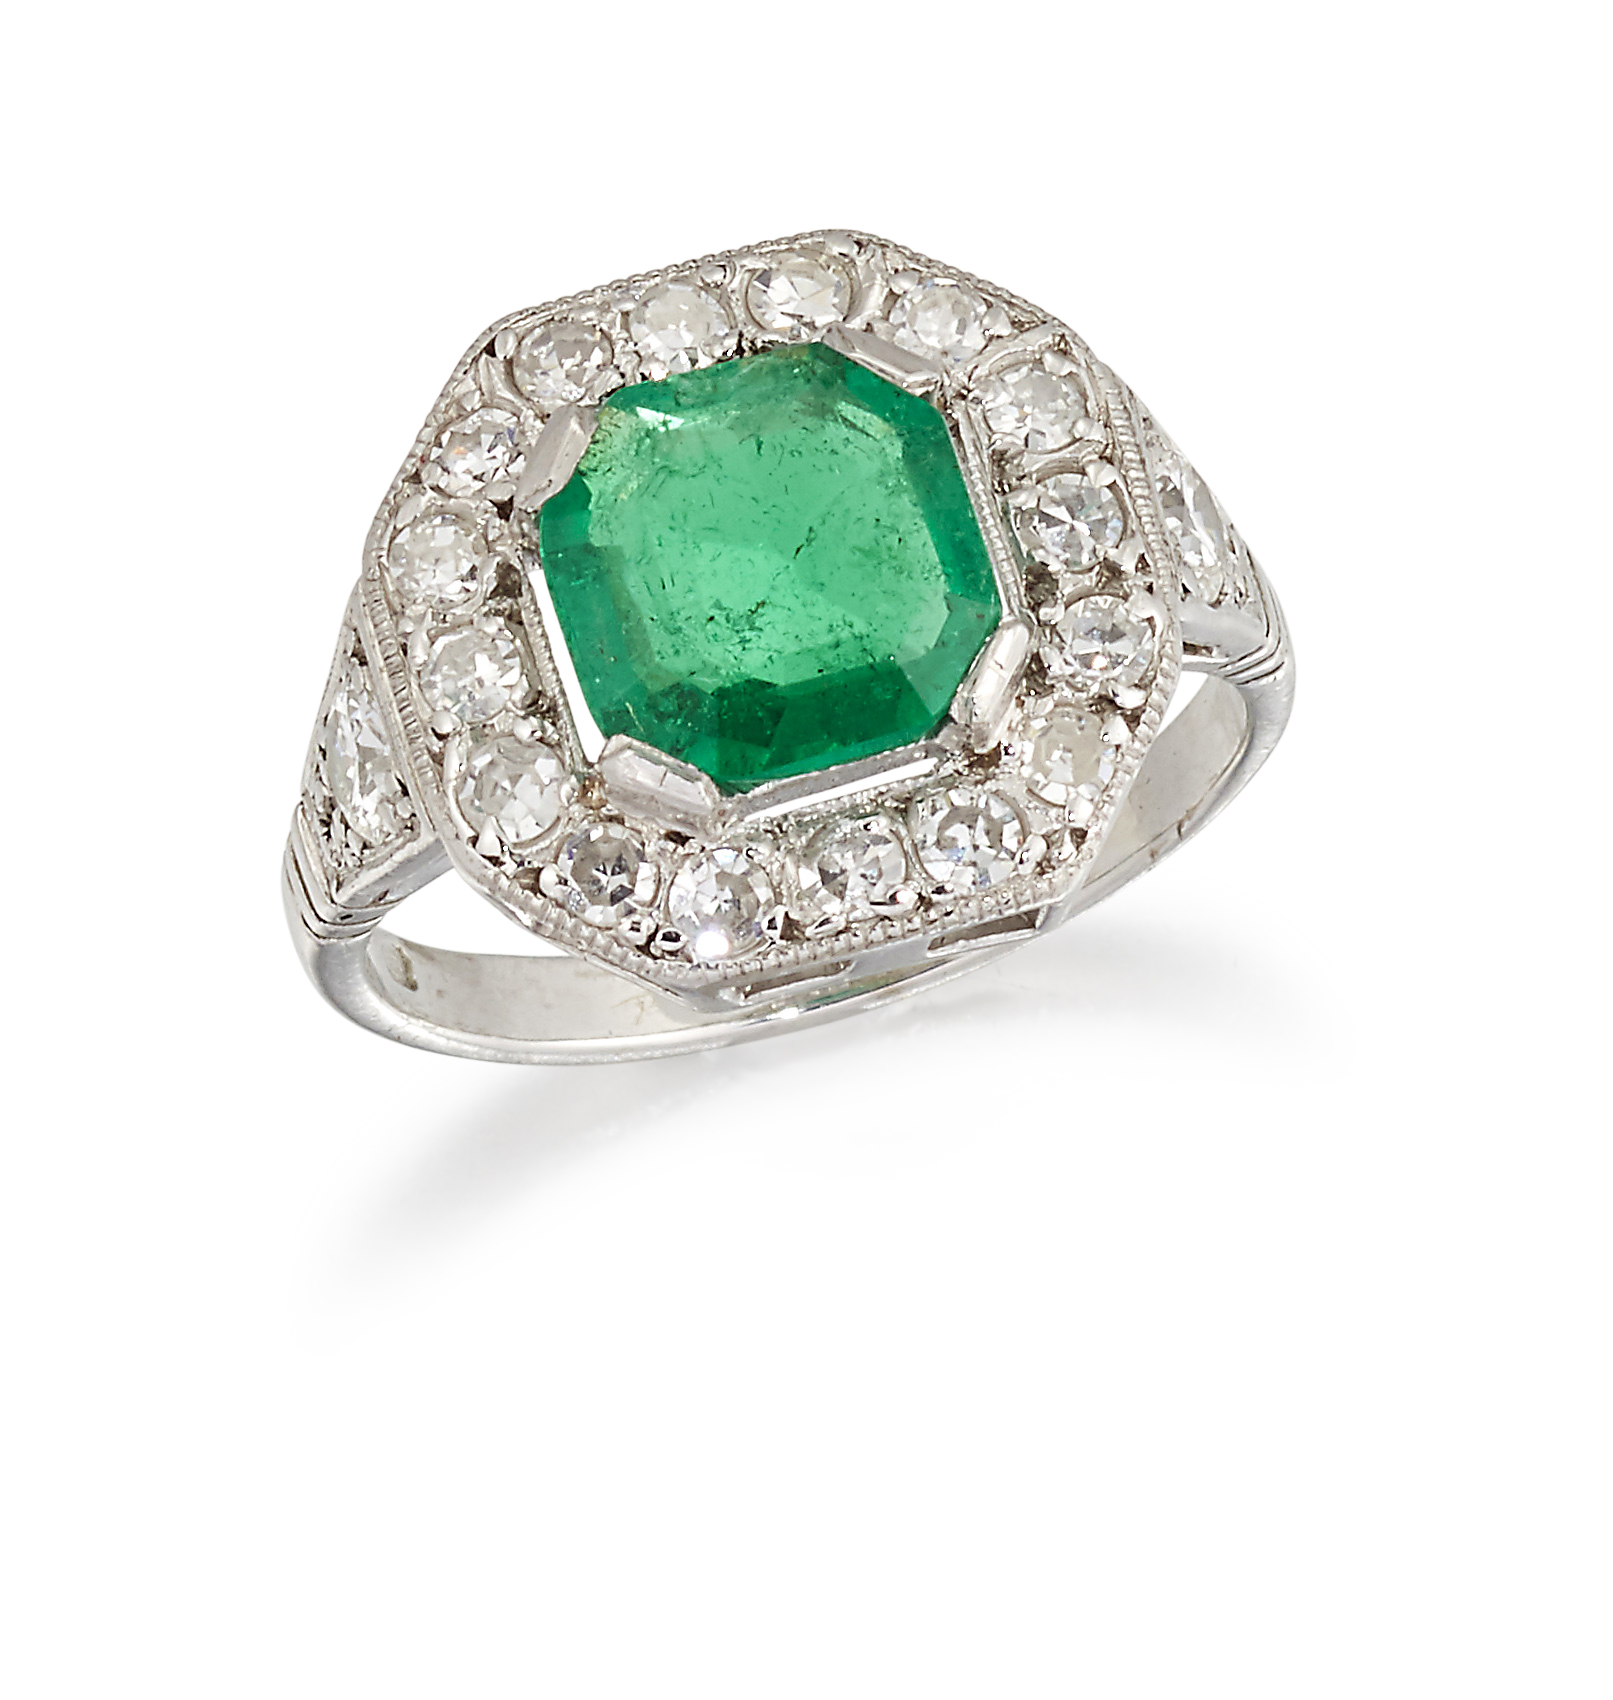 A FRENCH 14CT EMERALD AND DIAMOND RING